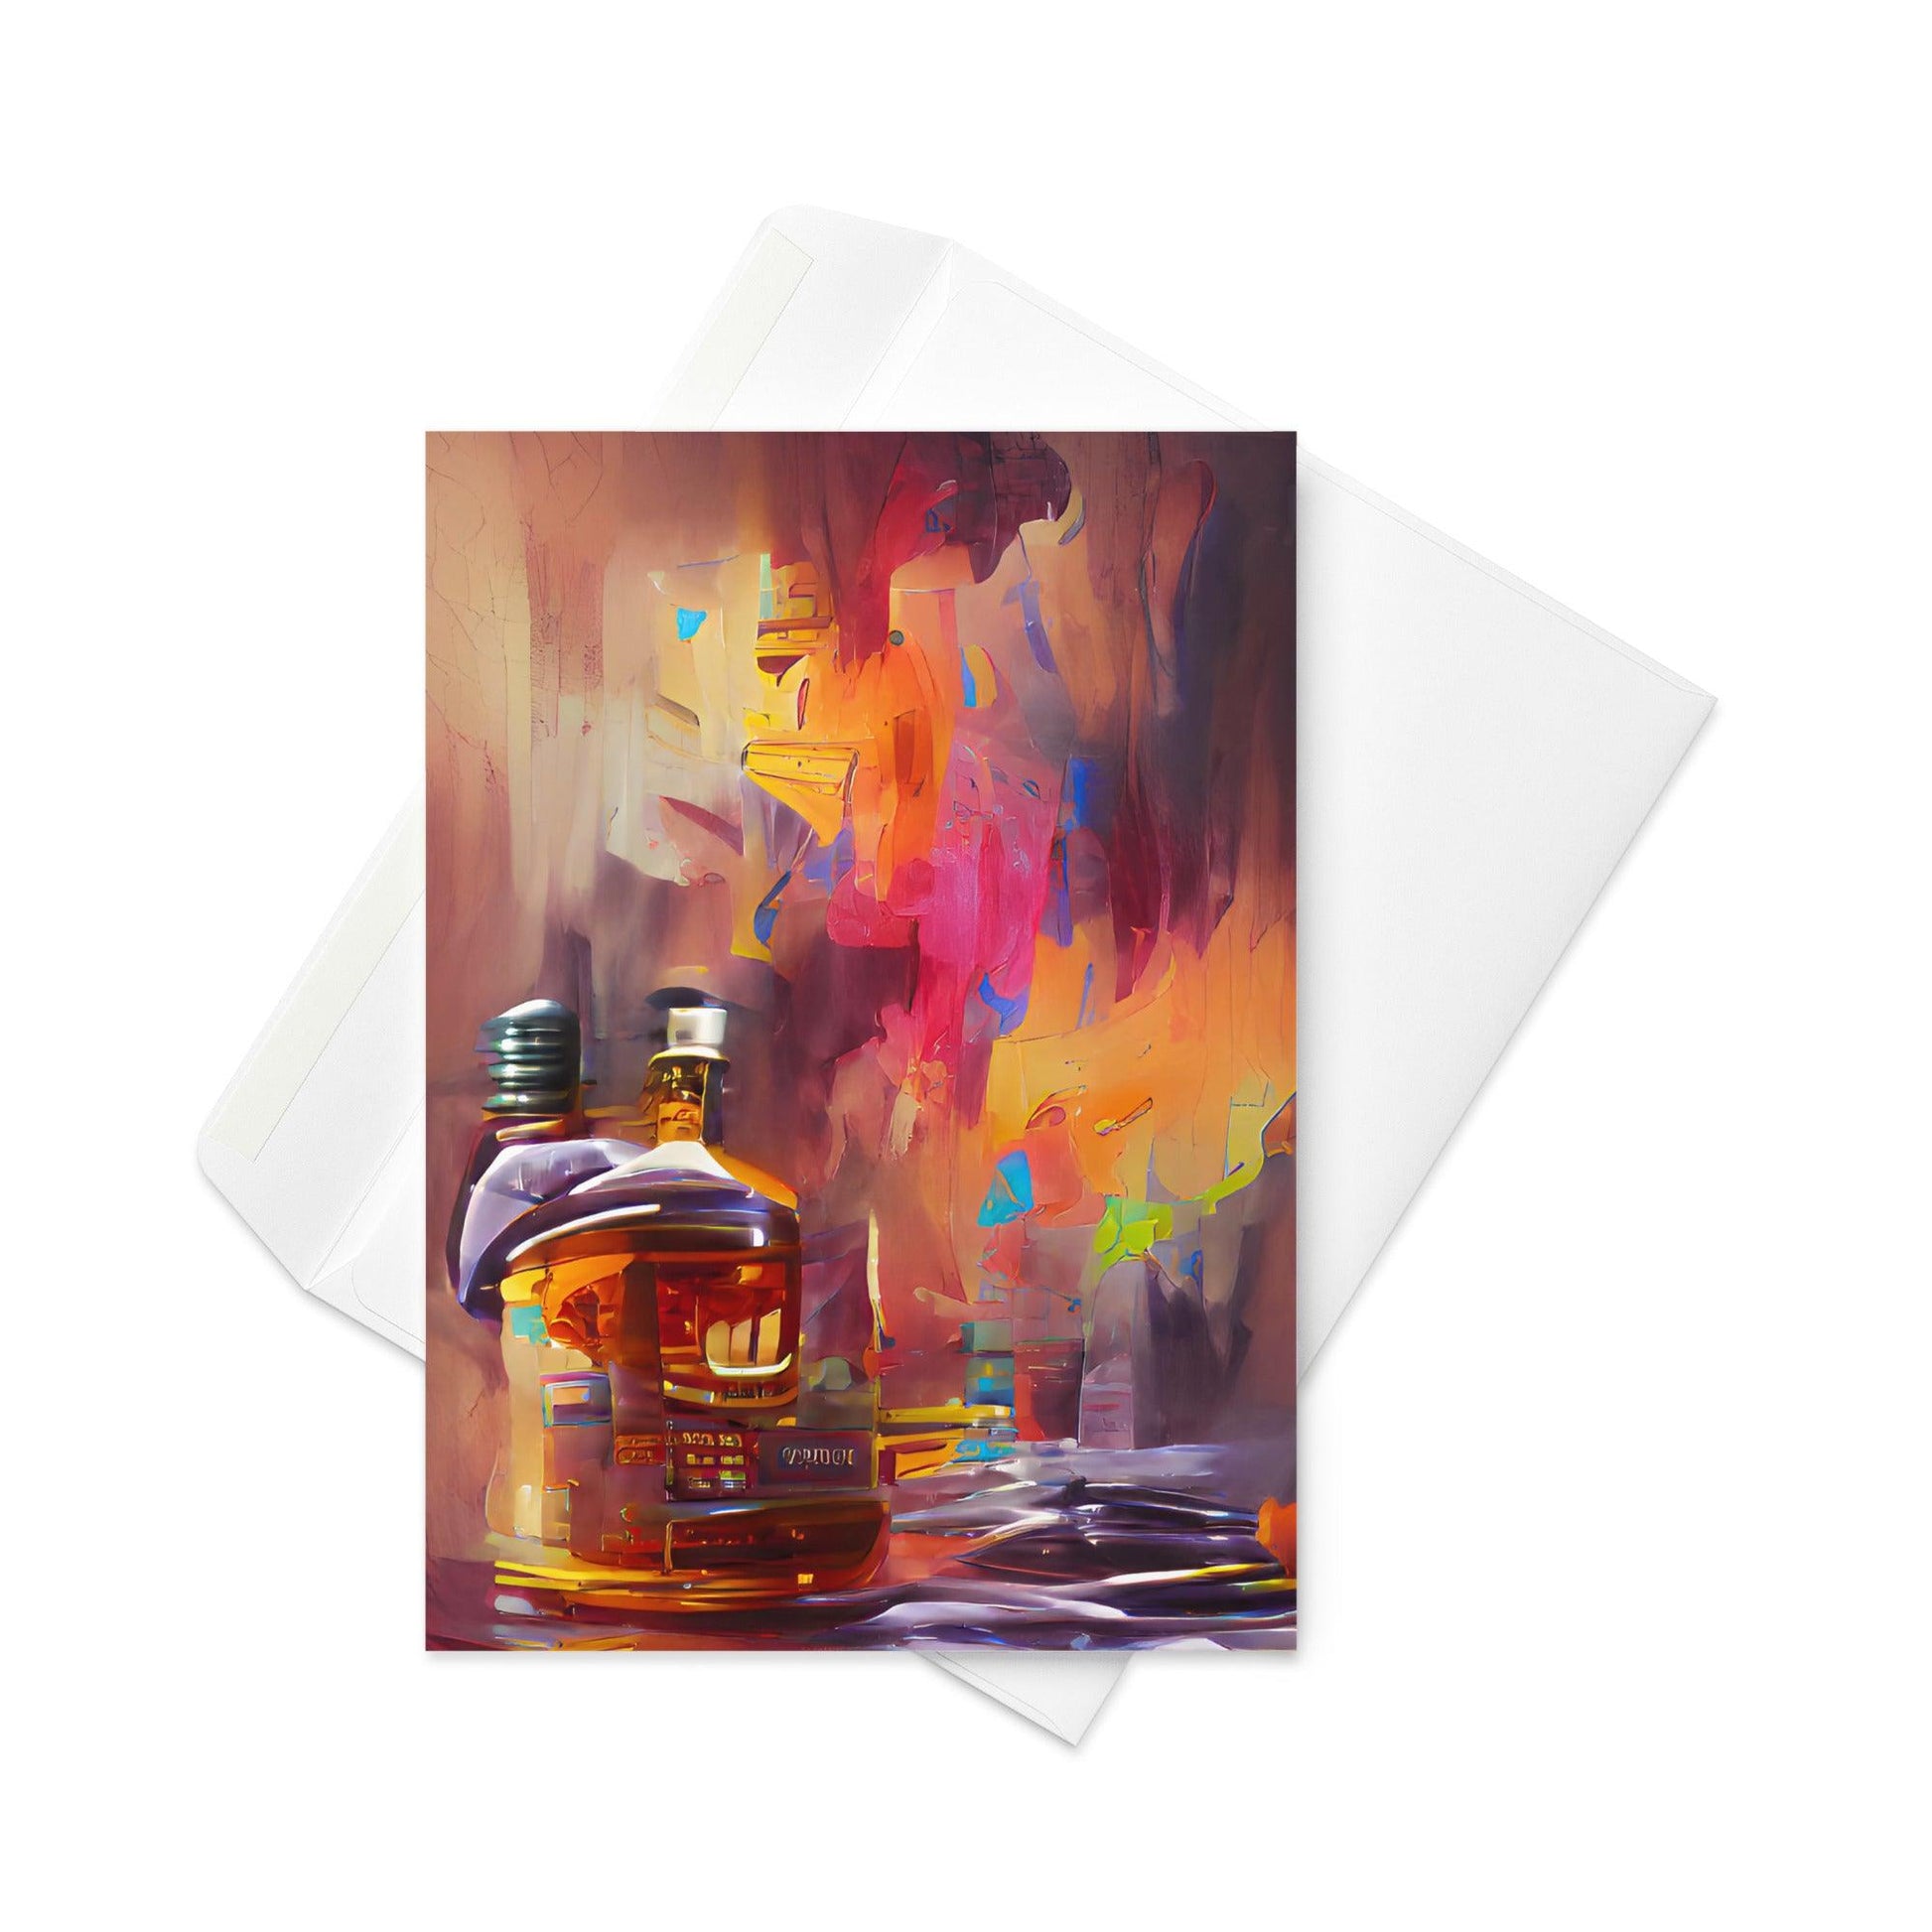 Whisky Flavour Notes - Note Card - iSAW Company